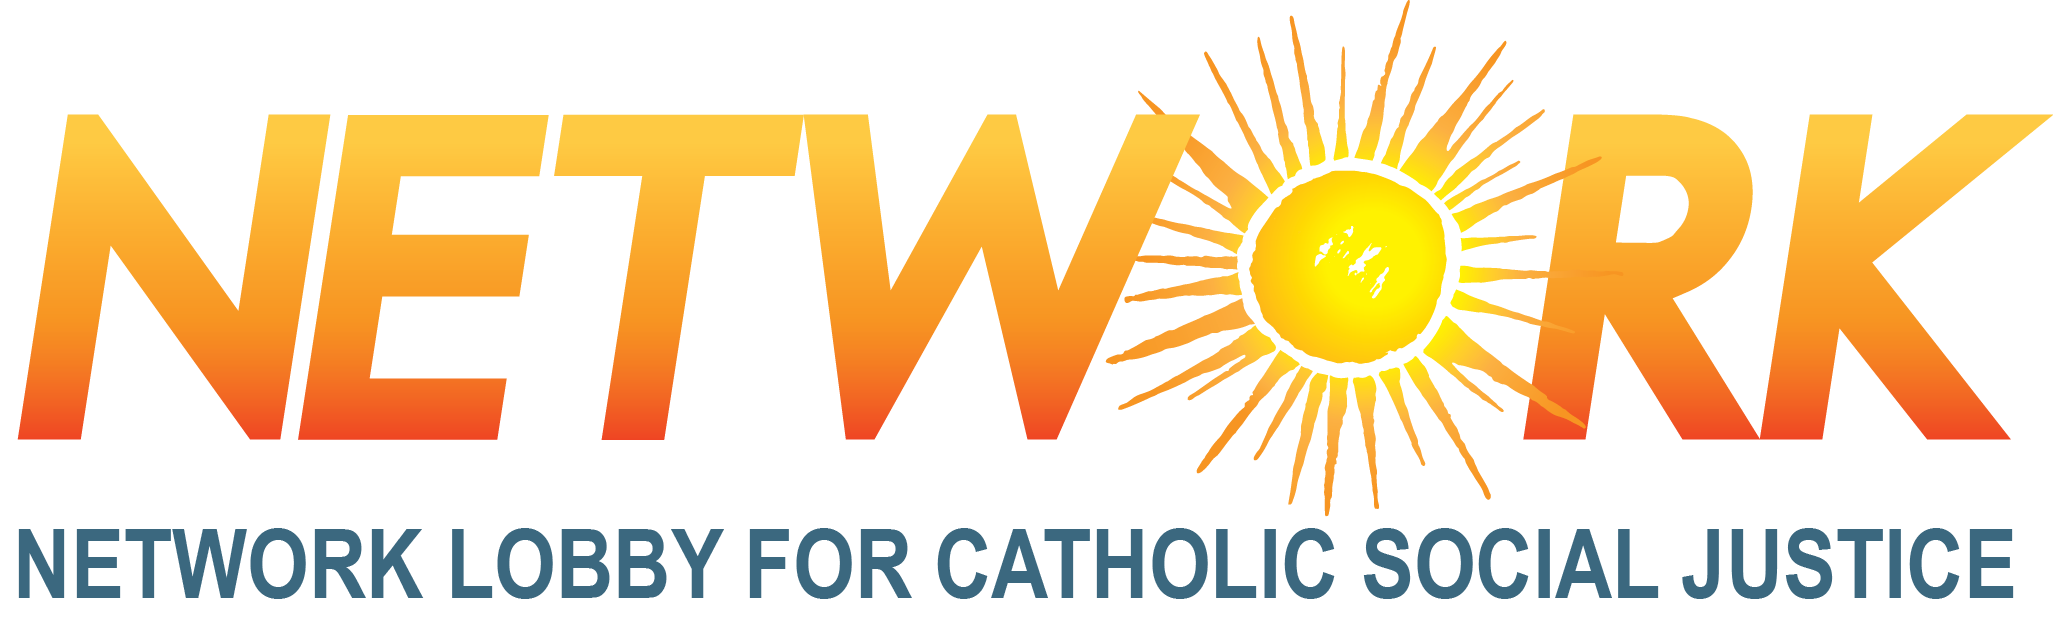 NETWORK Lobby for Catholic Social Justice